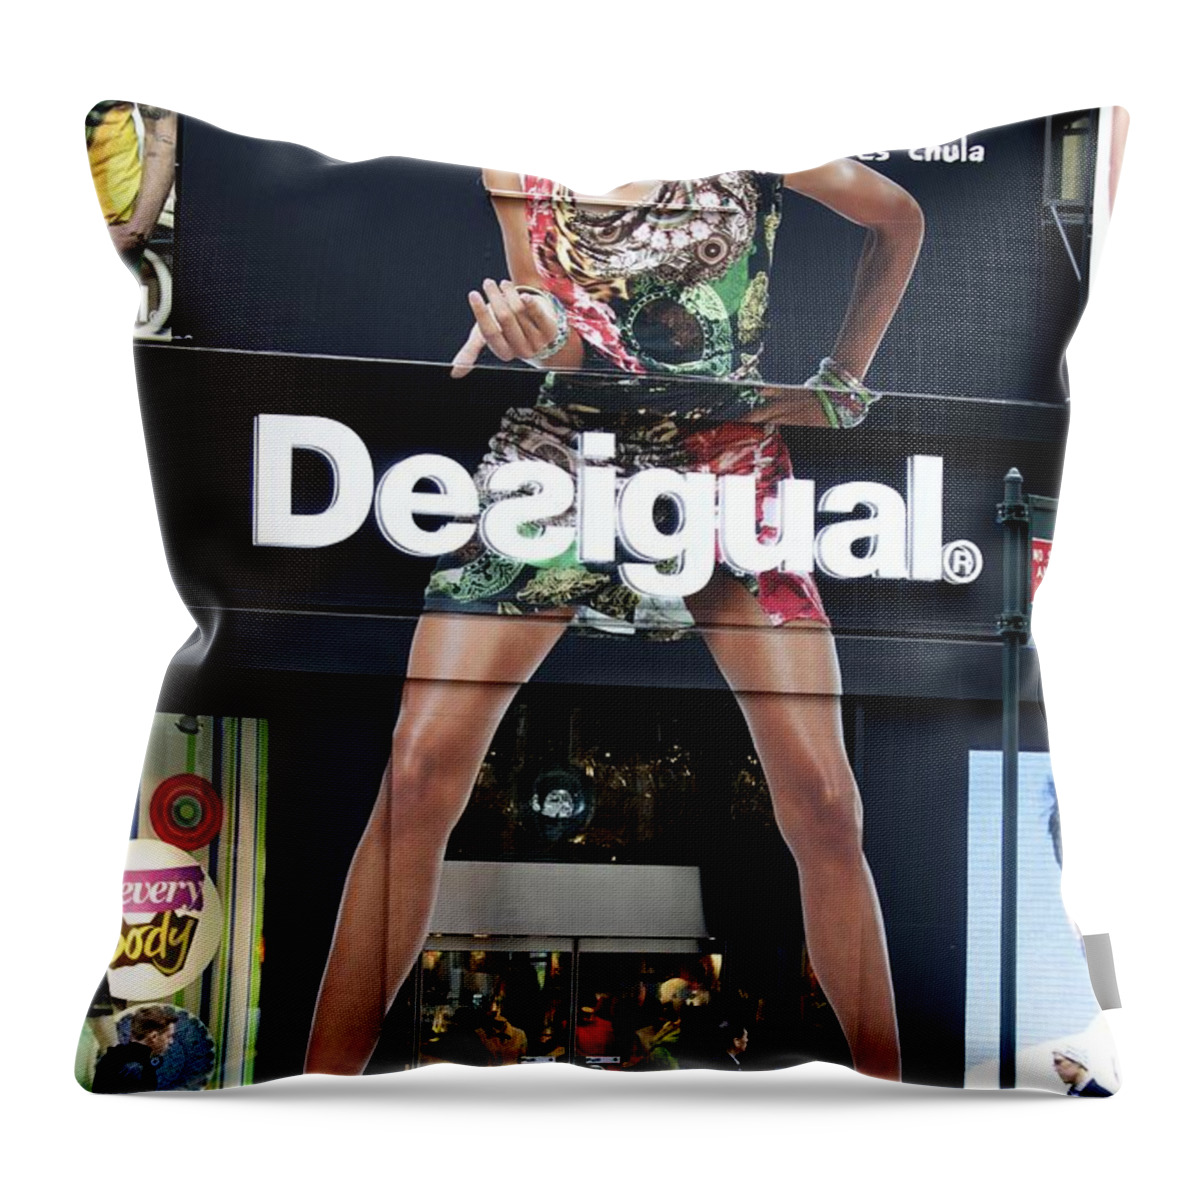 Desigual Throw Pillow featuring the photograph Desigual Storefront by Alice Gipson